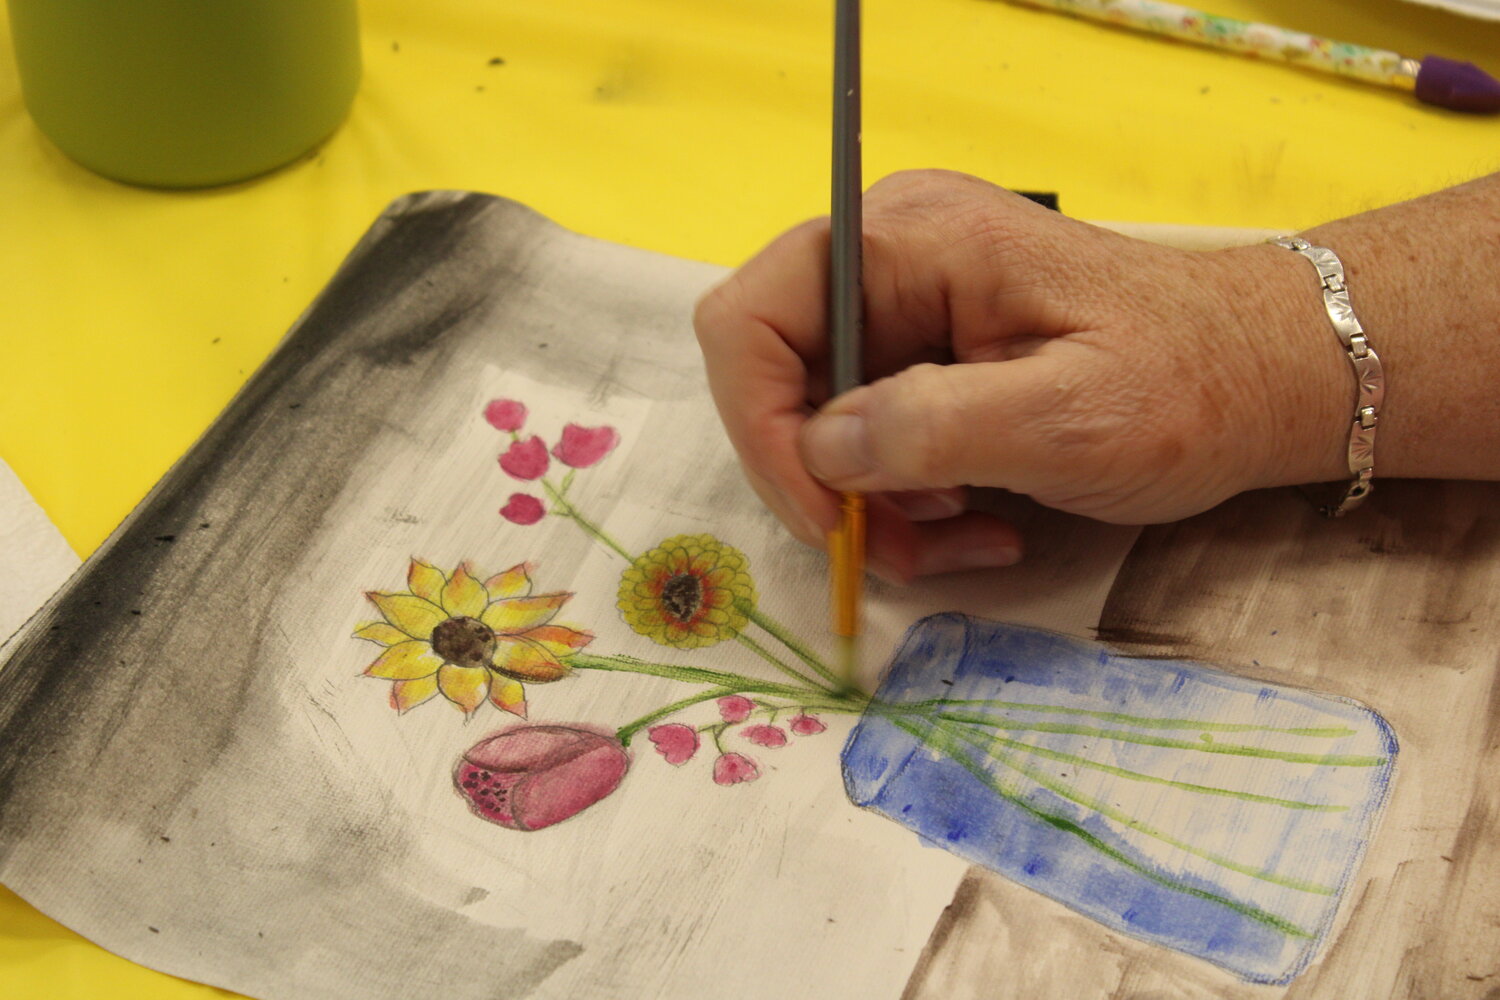 Linda Douglas works on her watercolor painting during the event at the Warrenton Scenic Regional Library.